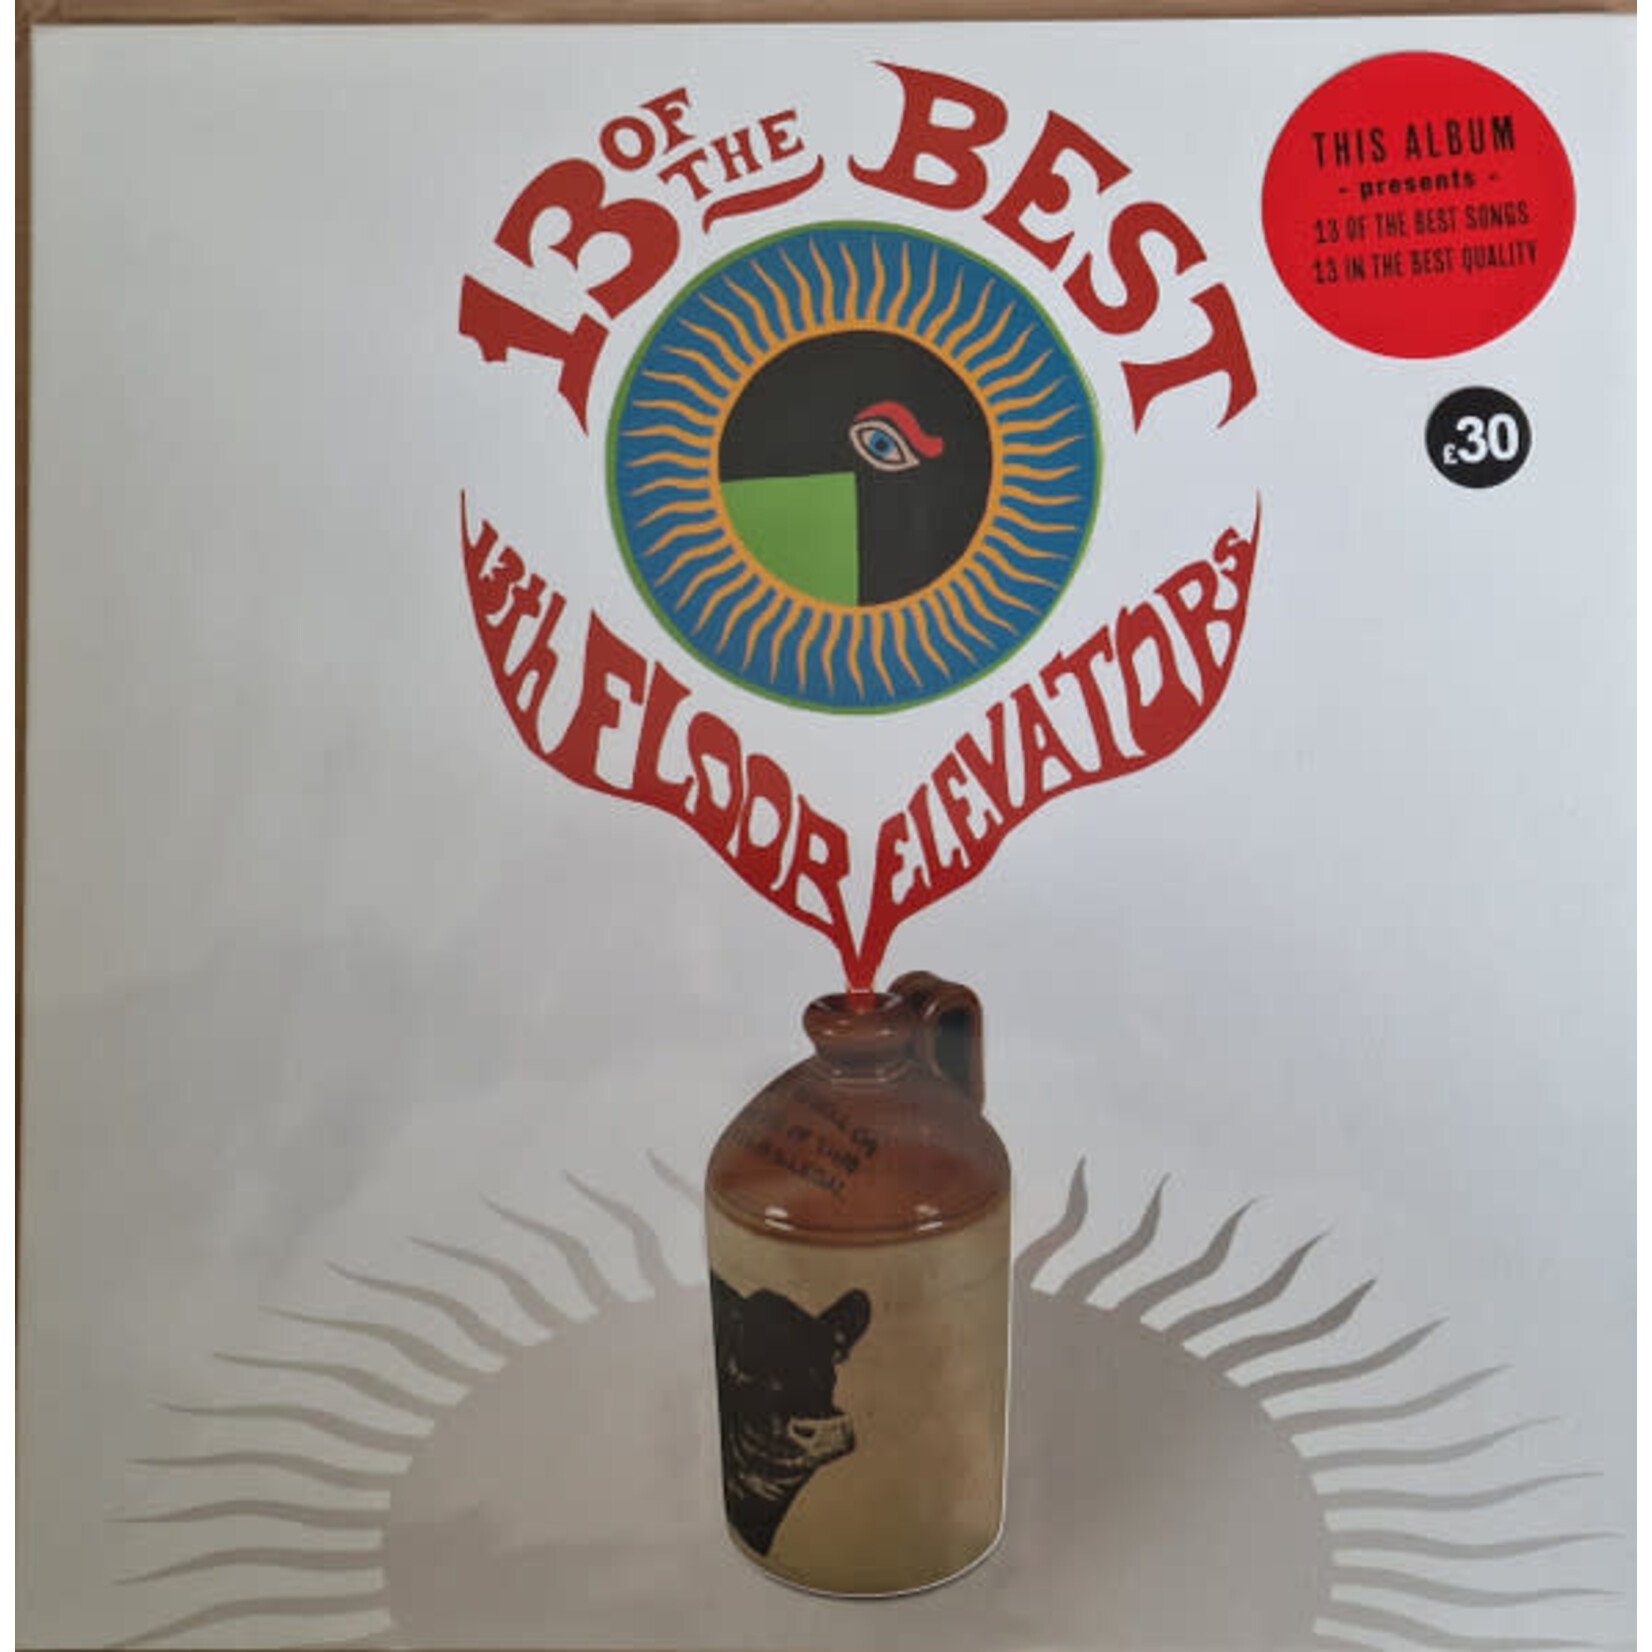 [New] 13th Floor Elevators: 13 Of The Best (red vinyl/180g) [CHARLY]